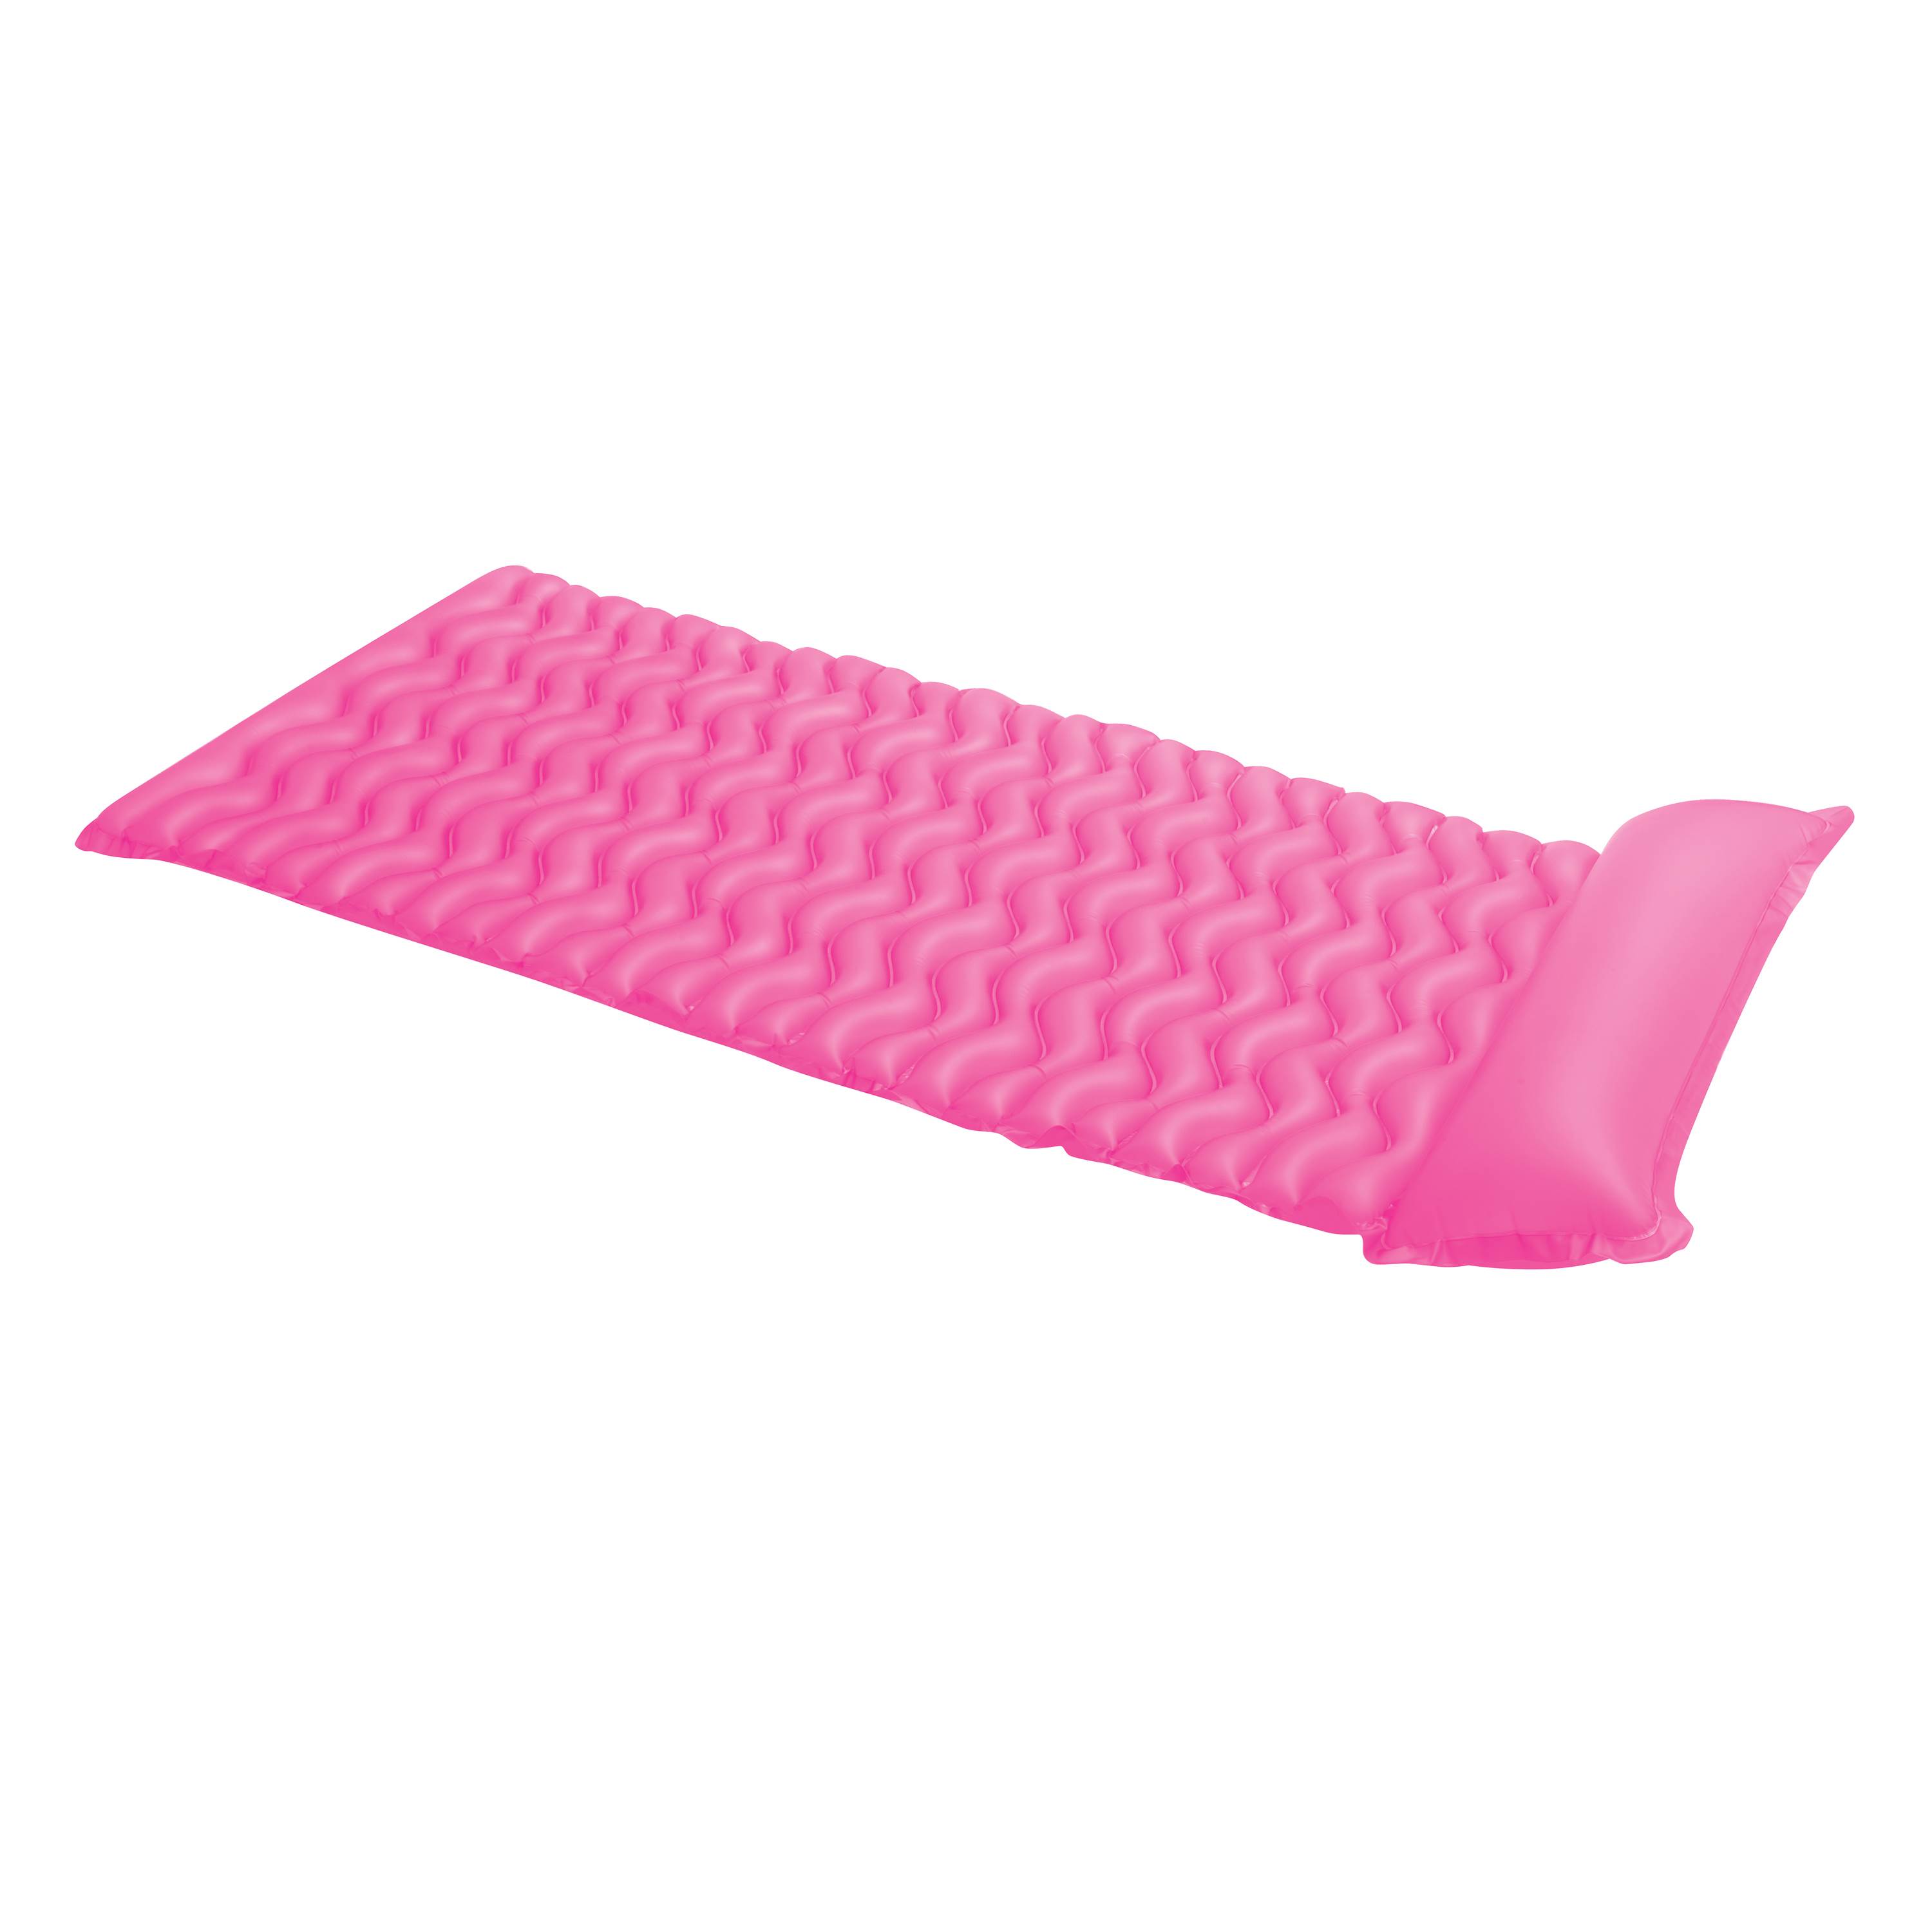 Intex Tote 'N Float Wave Mat Pool Lounger with Headrest - 1 Piece - image 5 of 6